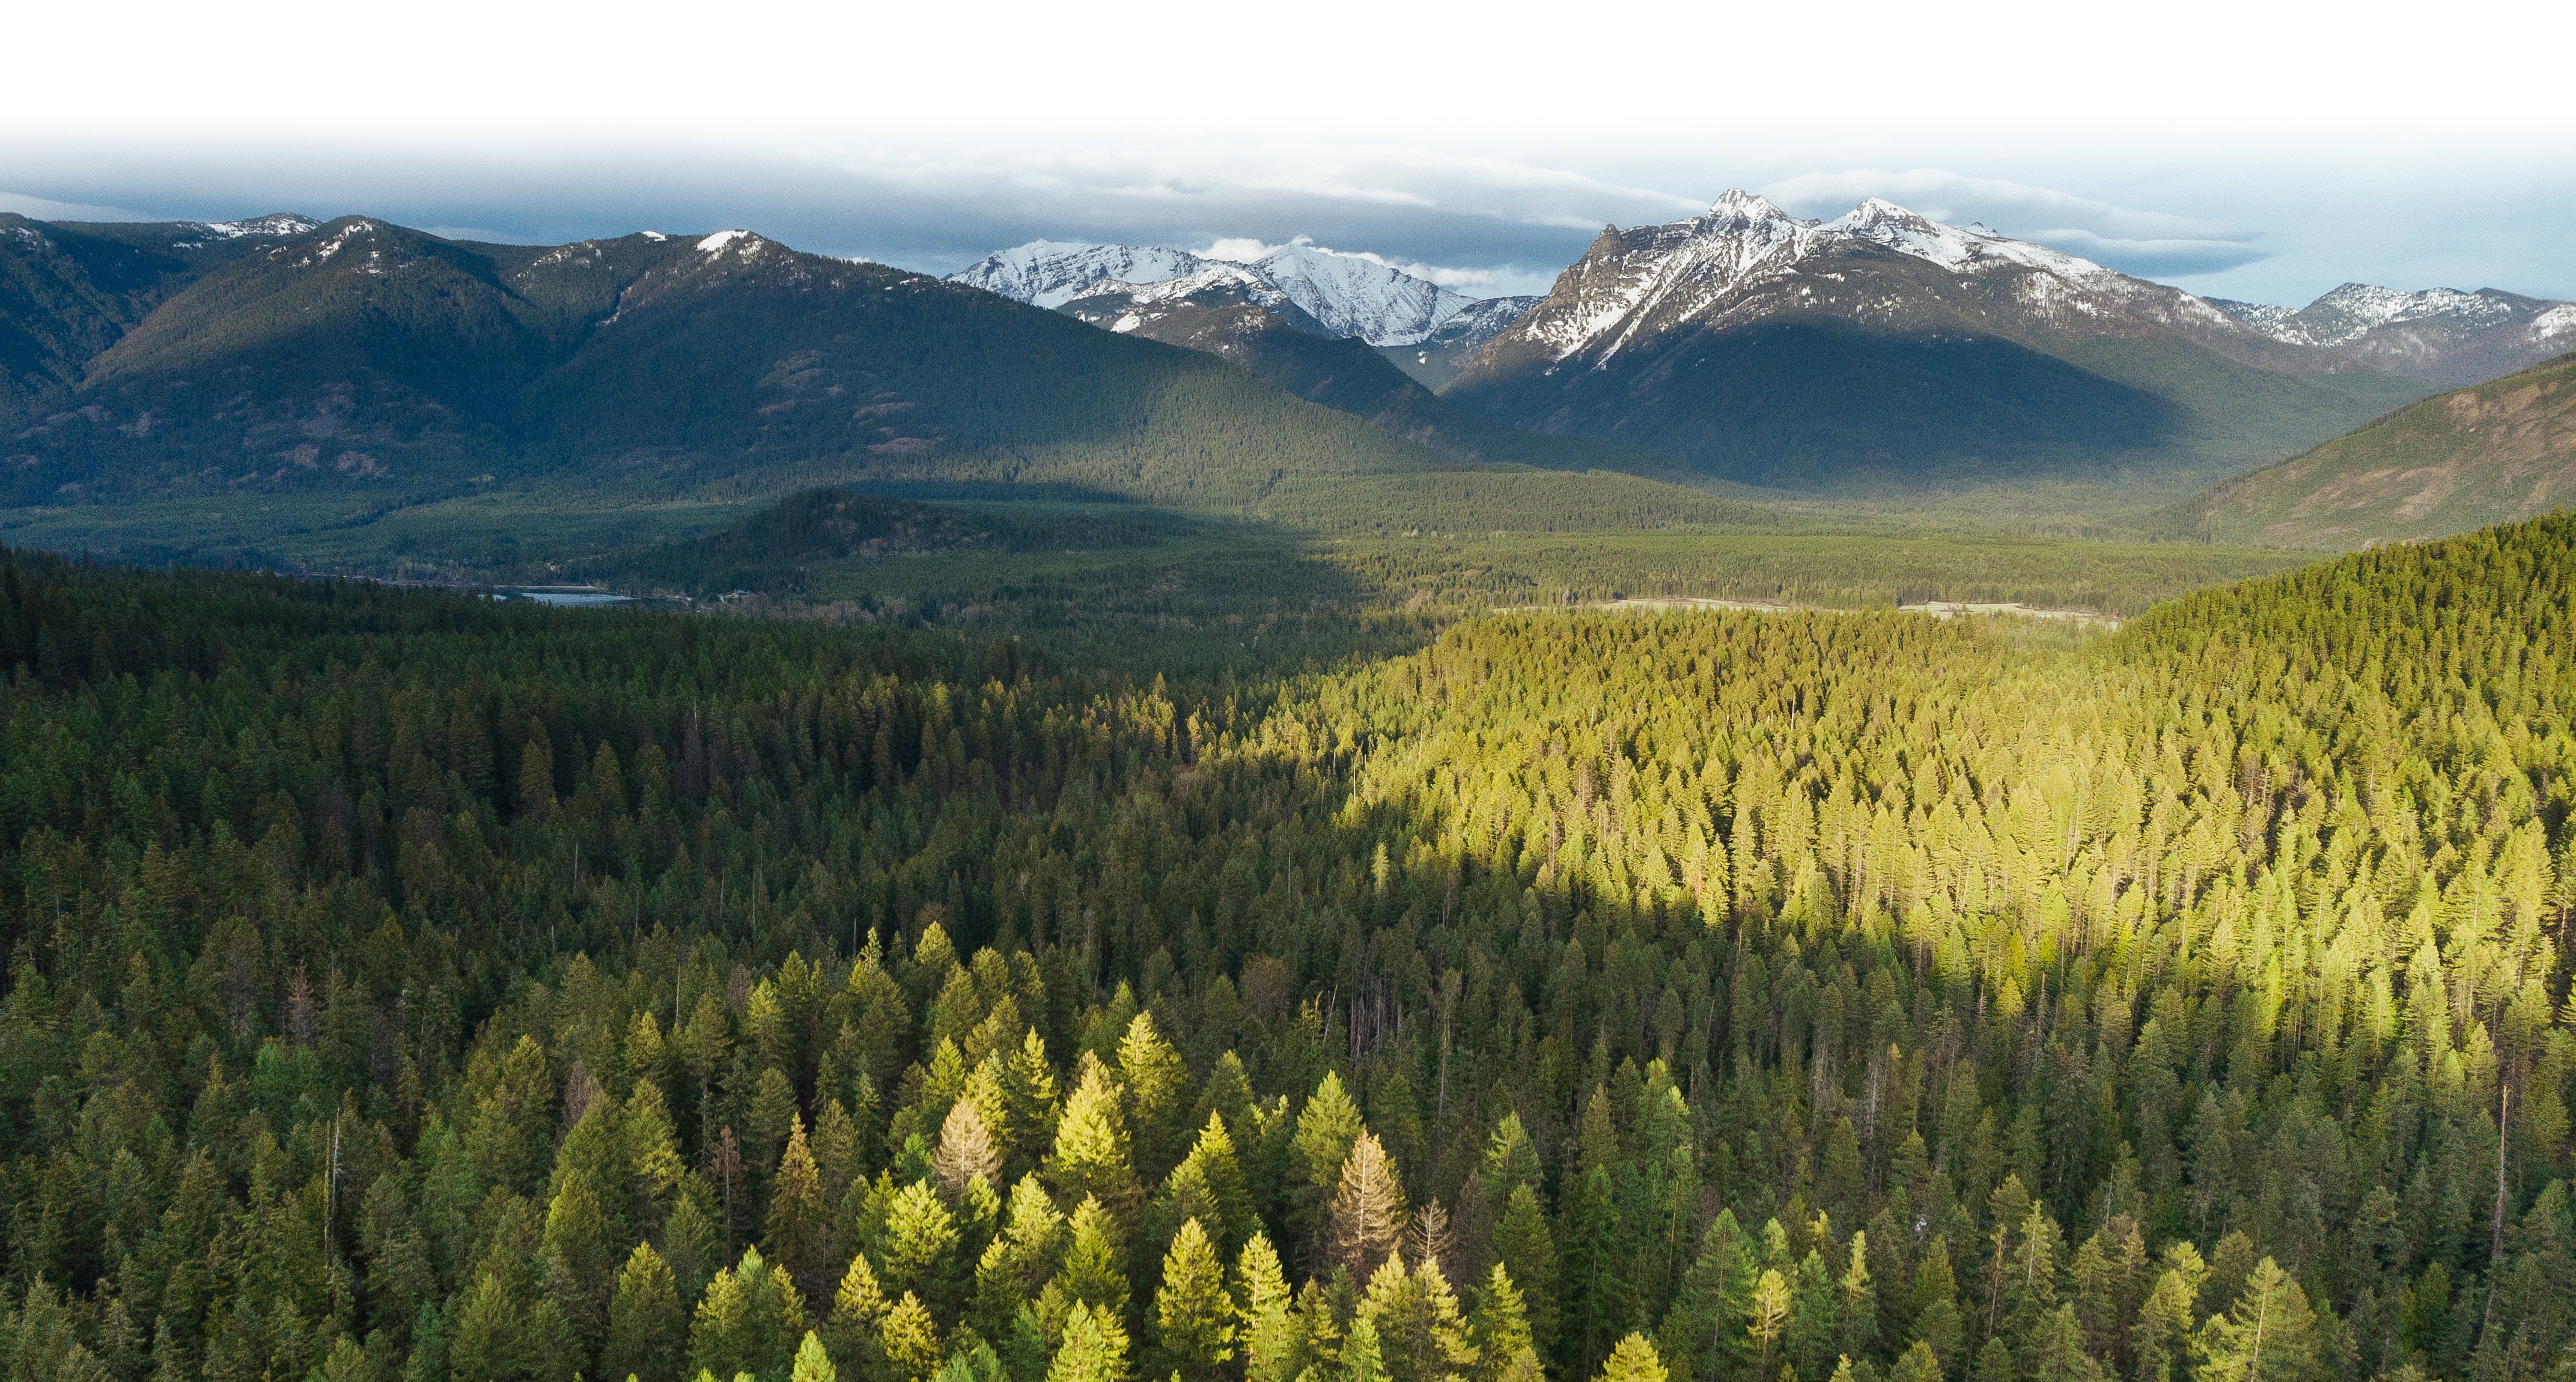 Earthjustice and our partners are fighting to protect Montana's Cabinet Mountains from mining development.